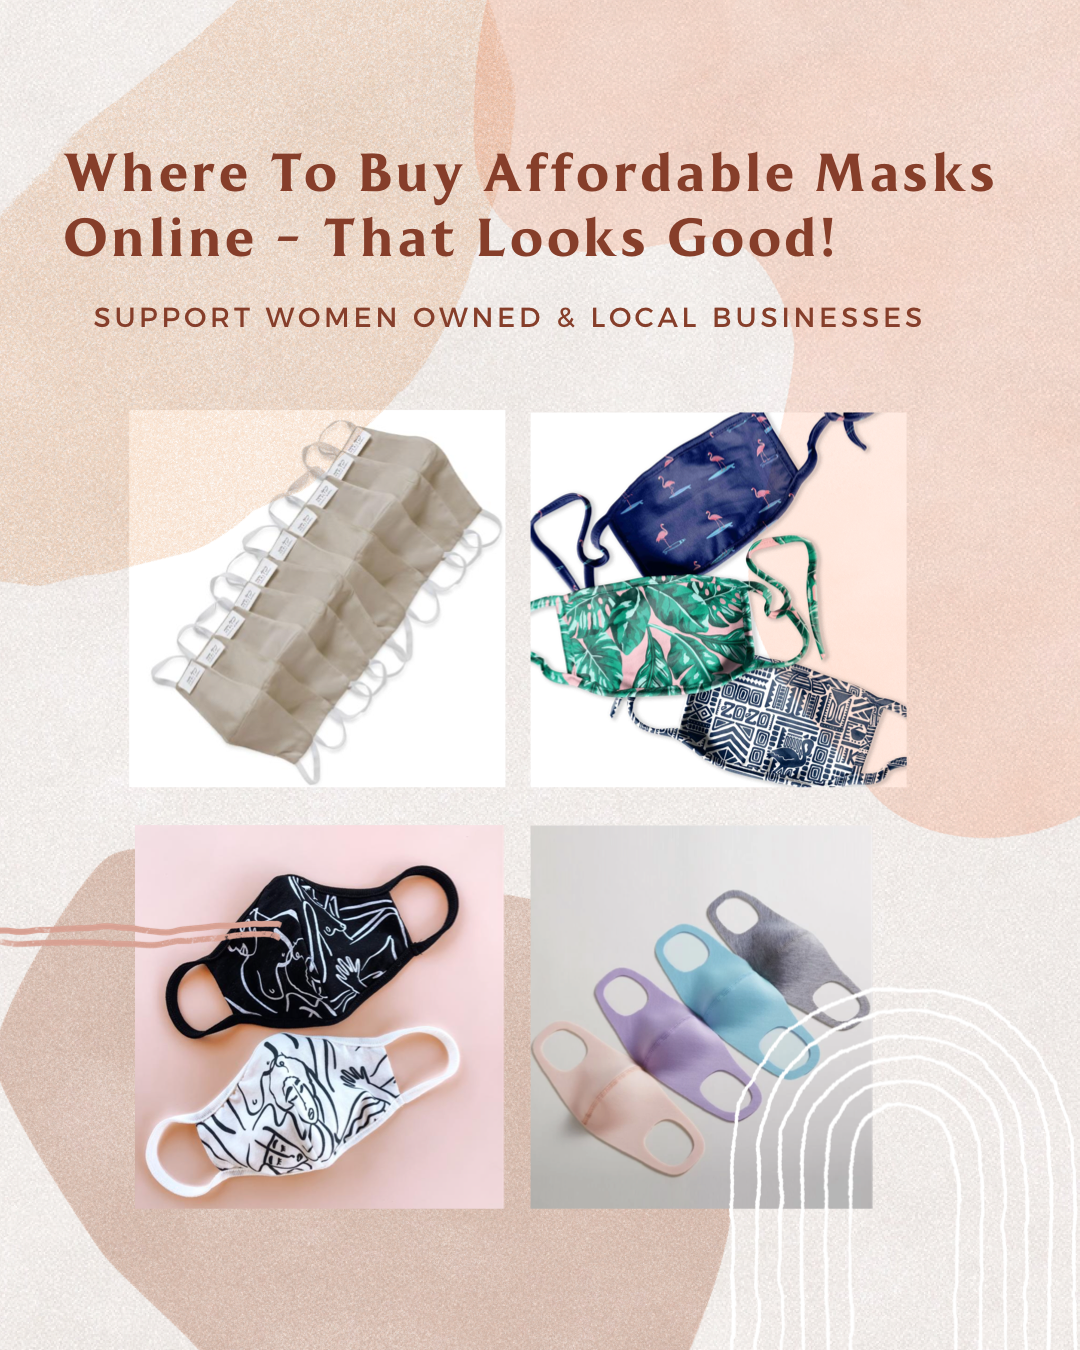 Where To Buy Affordable Face Mask Online - That Looks Good!